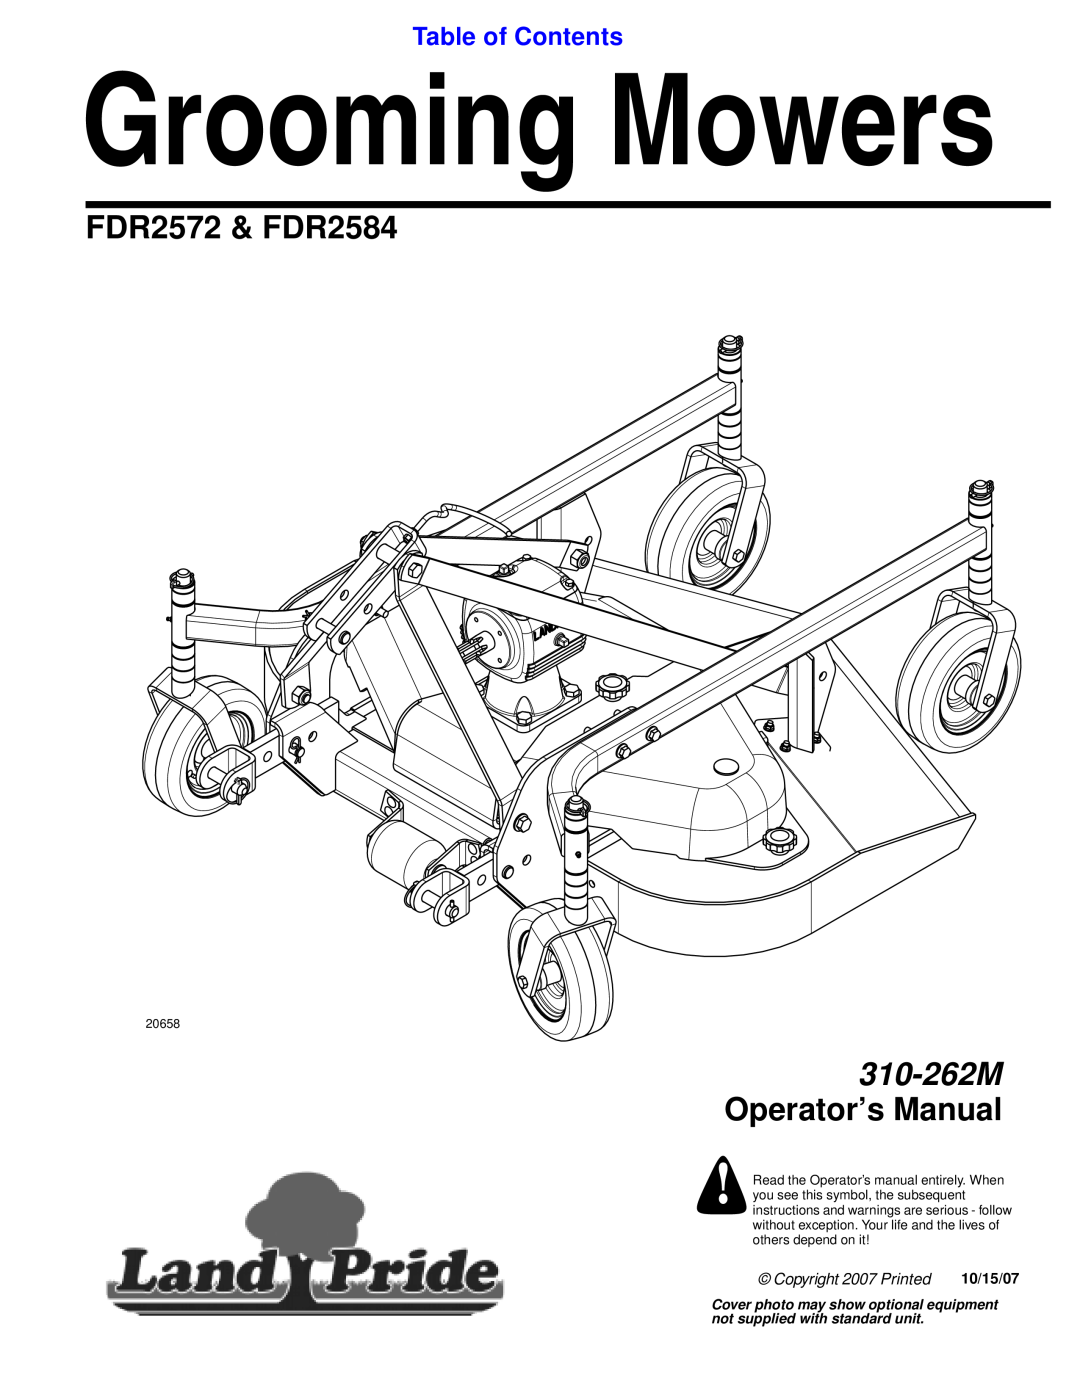 Land Pride manual FDR2572 & FDR2584, Table of Contents, Grooming Mowers, 310-262M Operator’s Manual, 10/15/07, 20658 